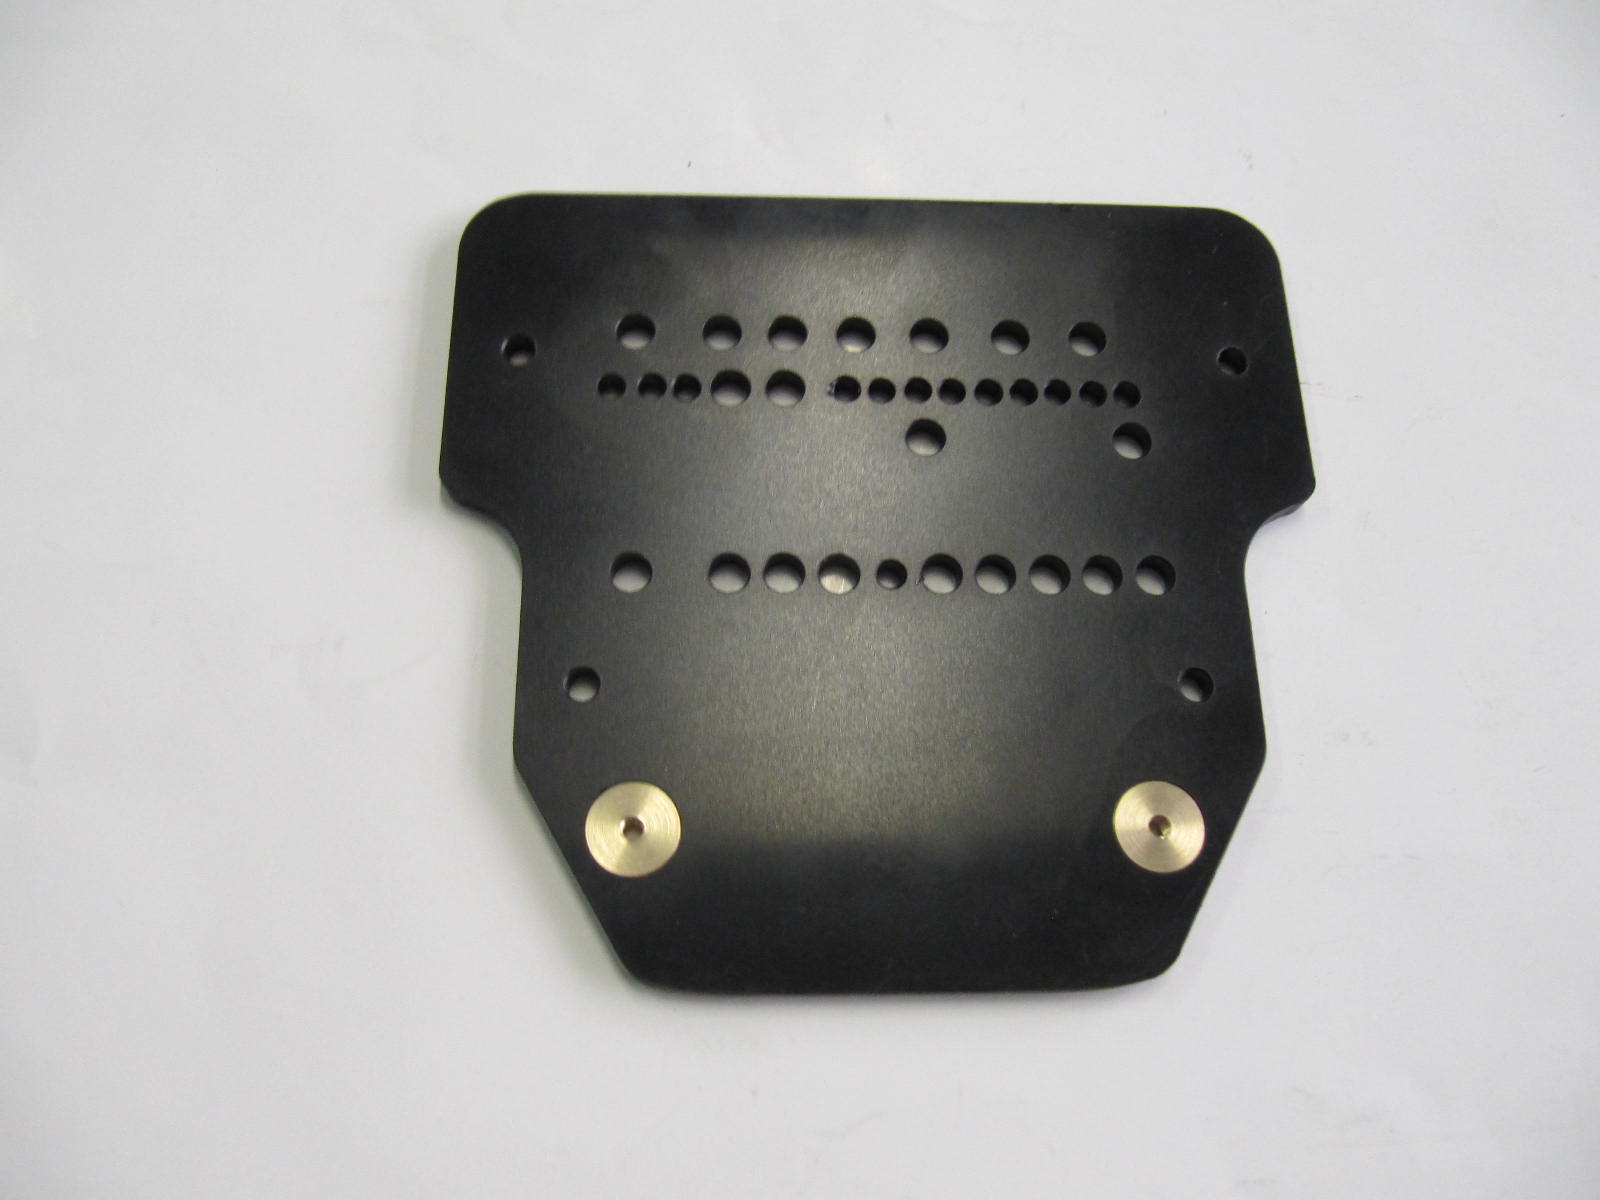 81701978 - wires guide plate